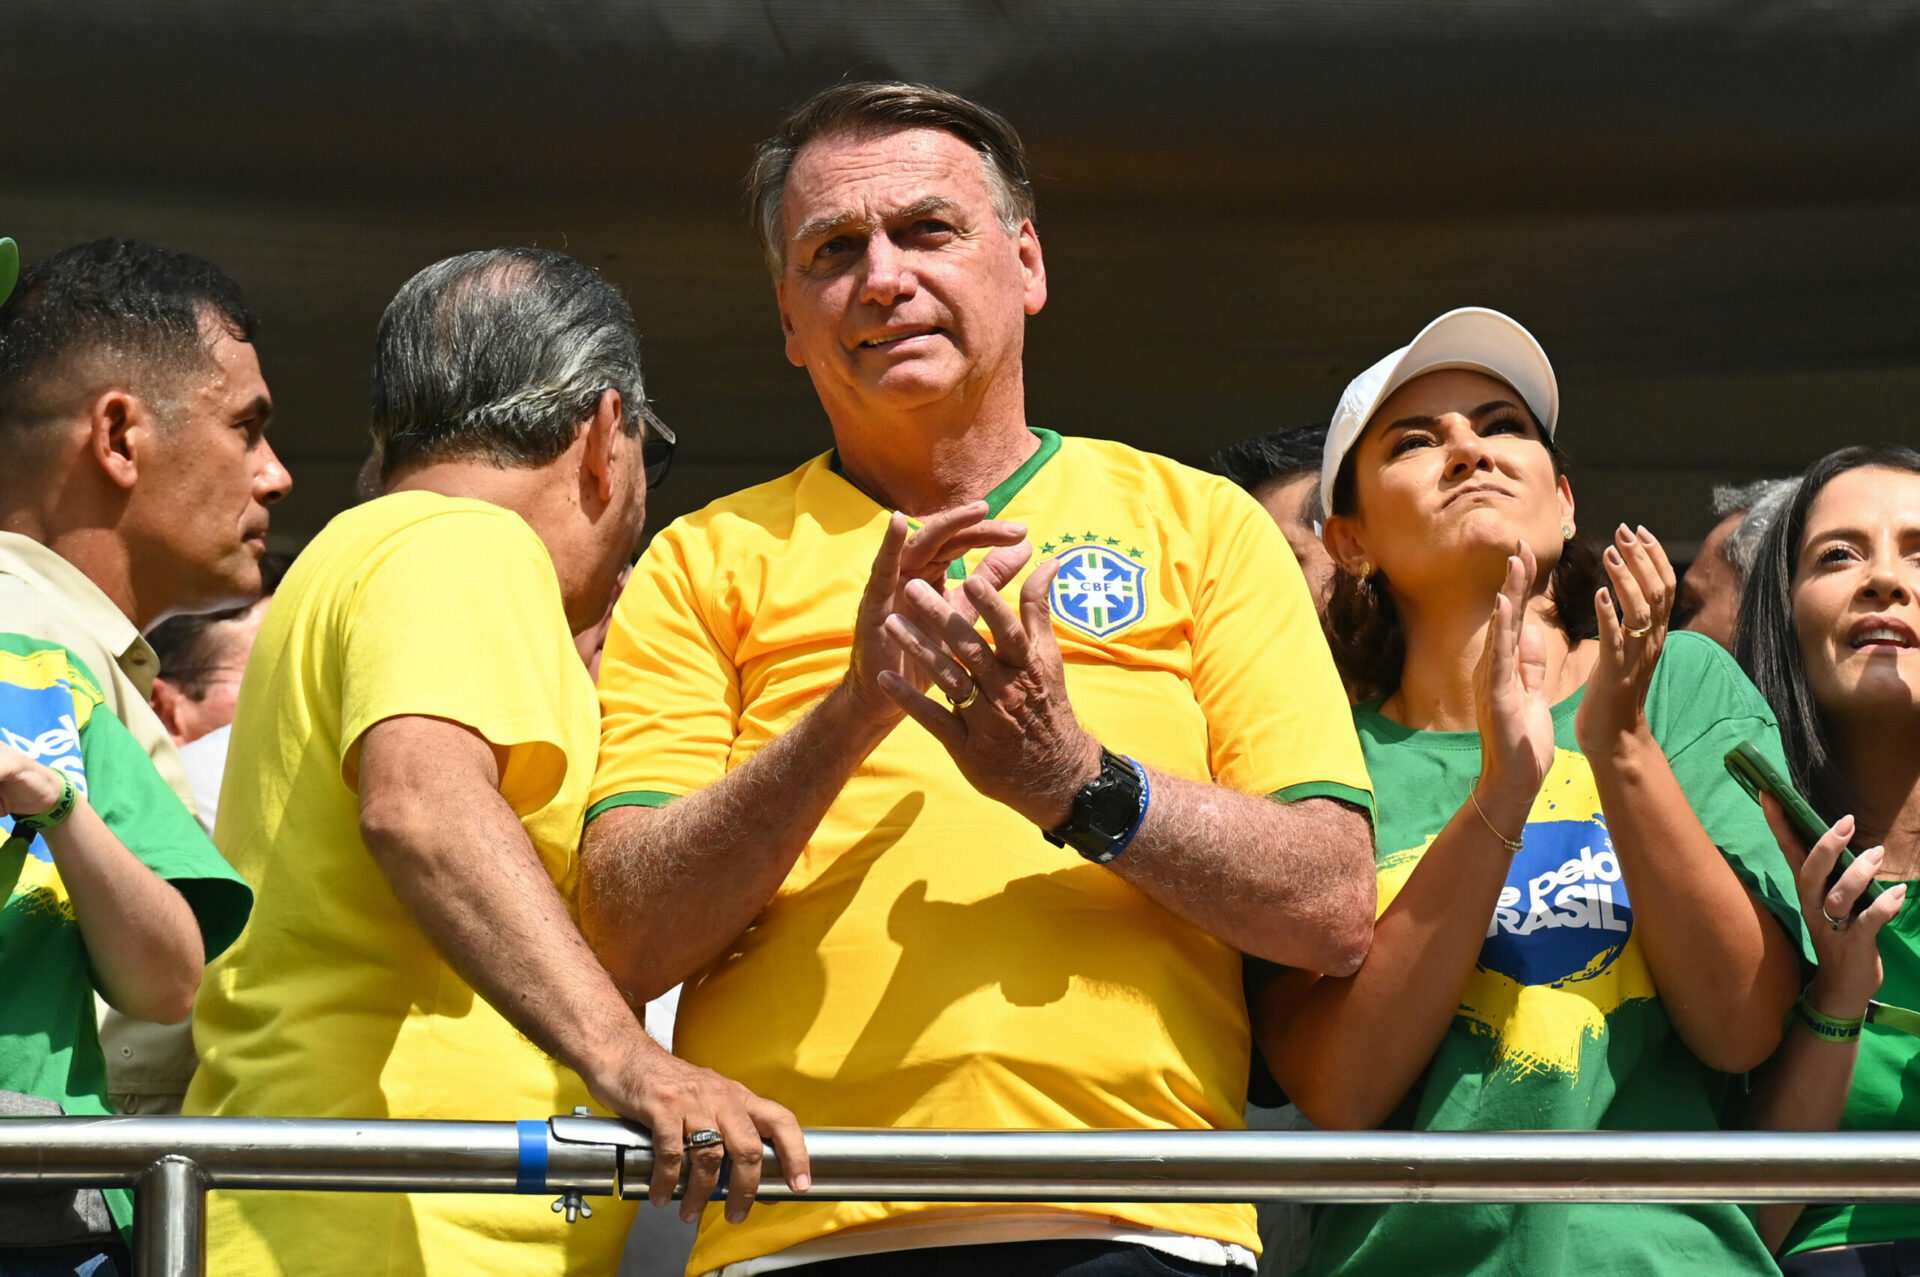 Bolsonaro rallies supporters in Brazil as police probes close in